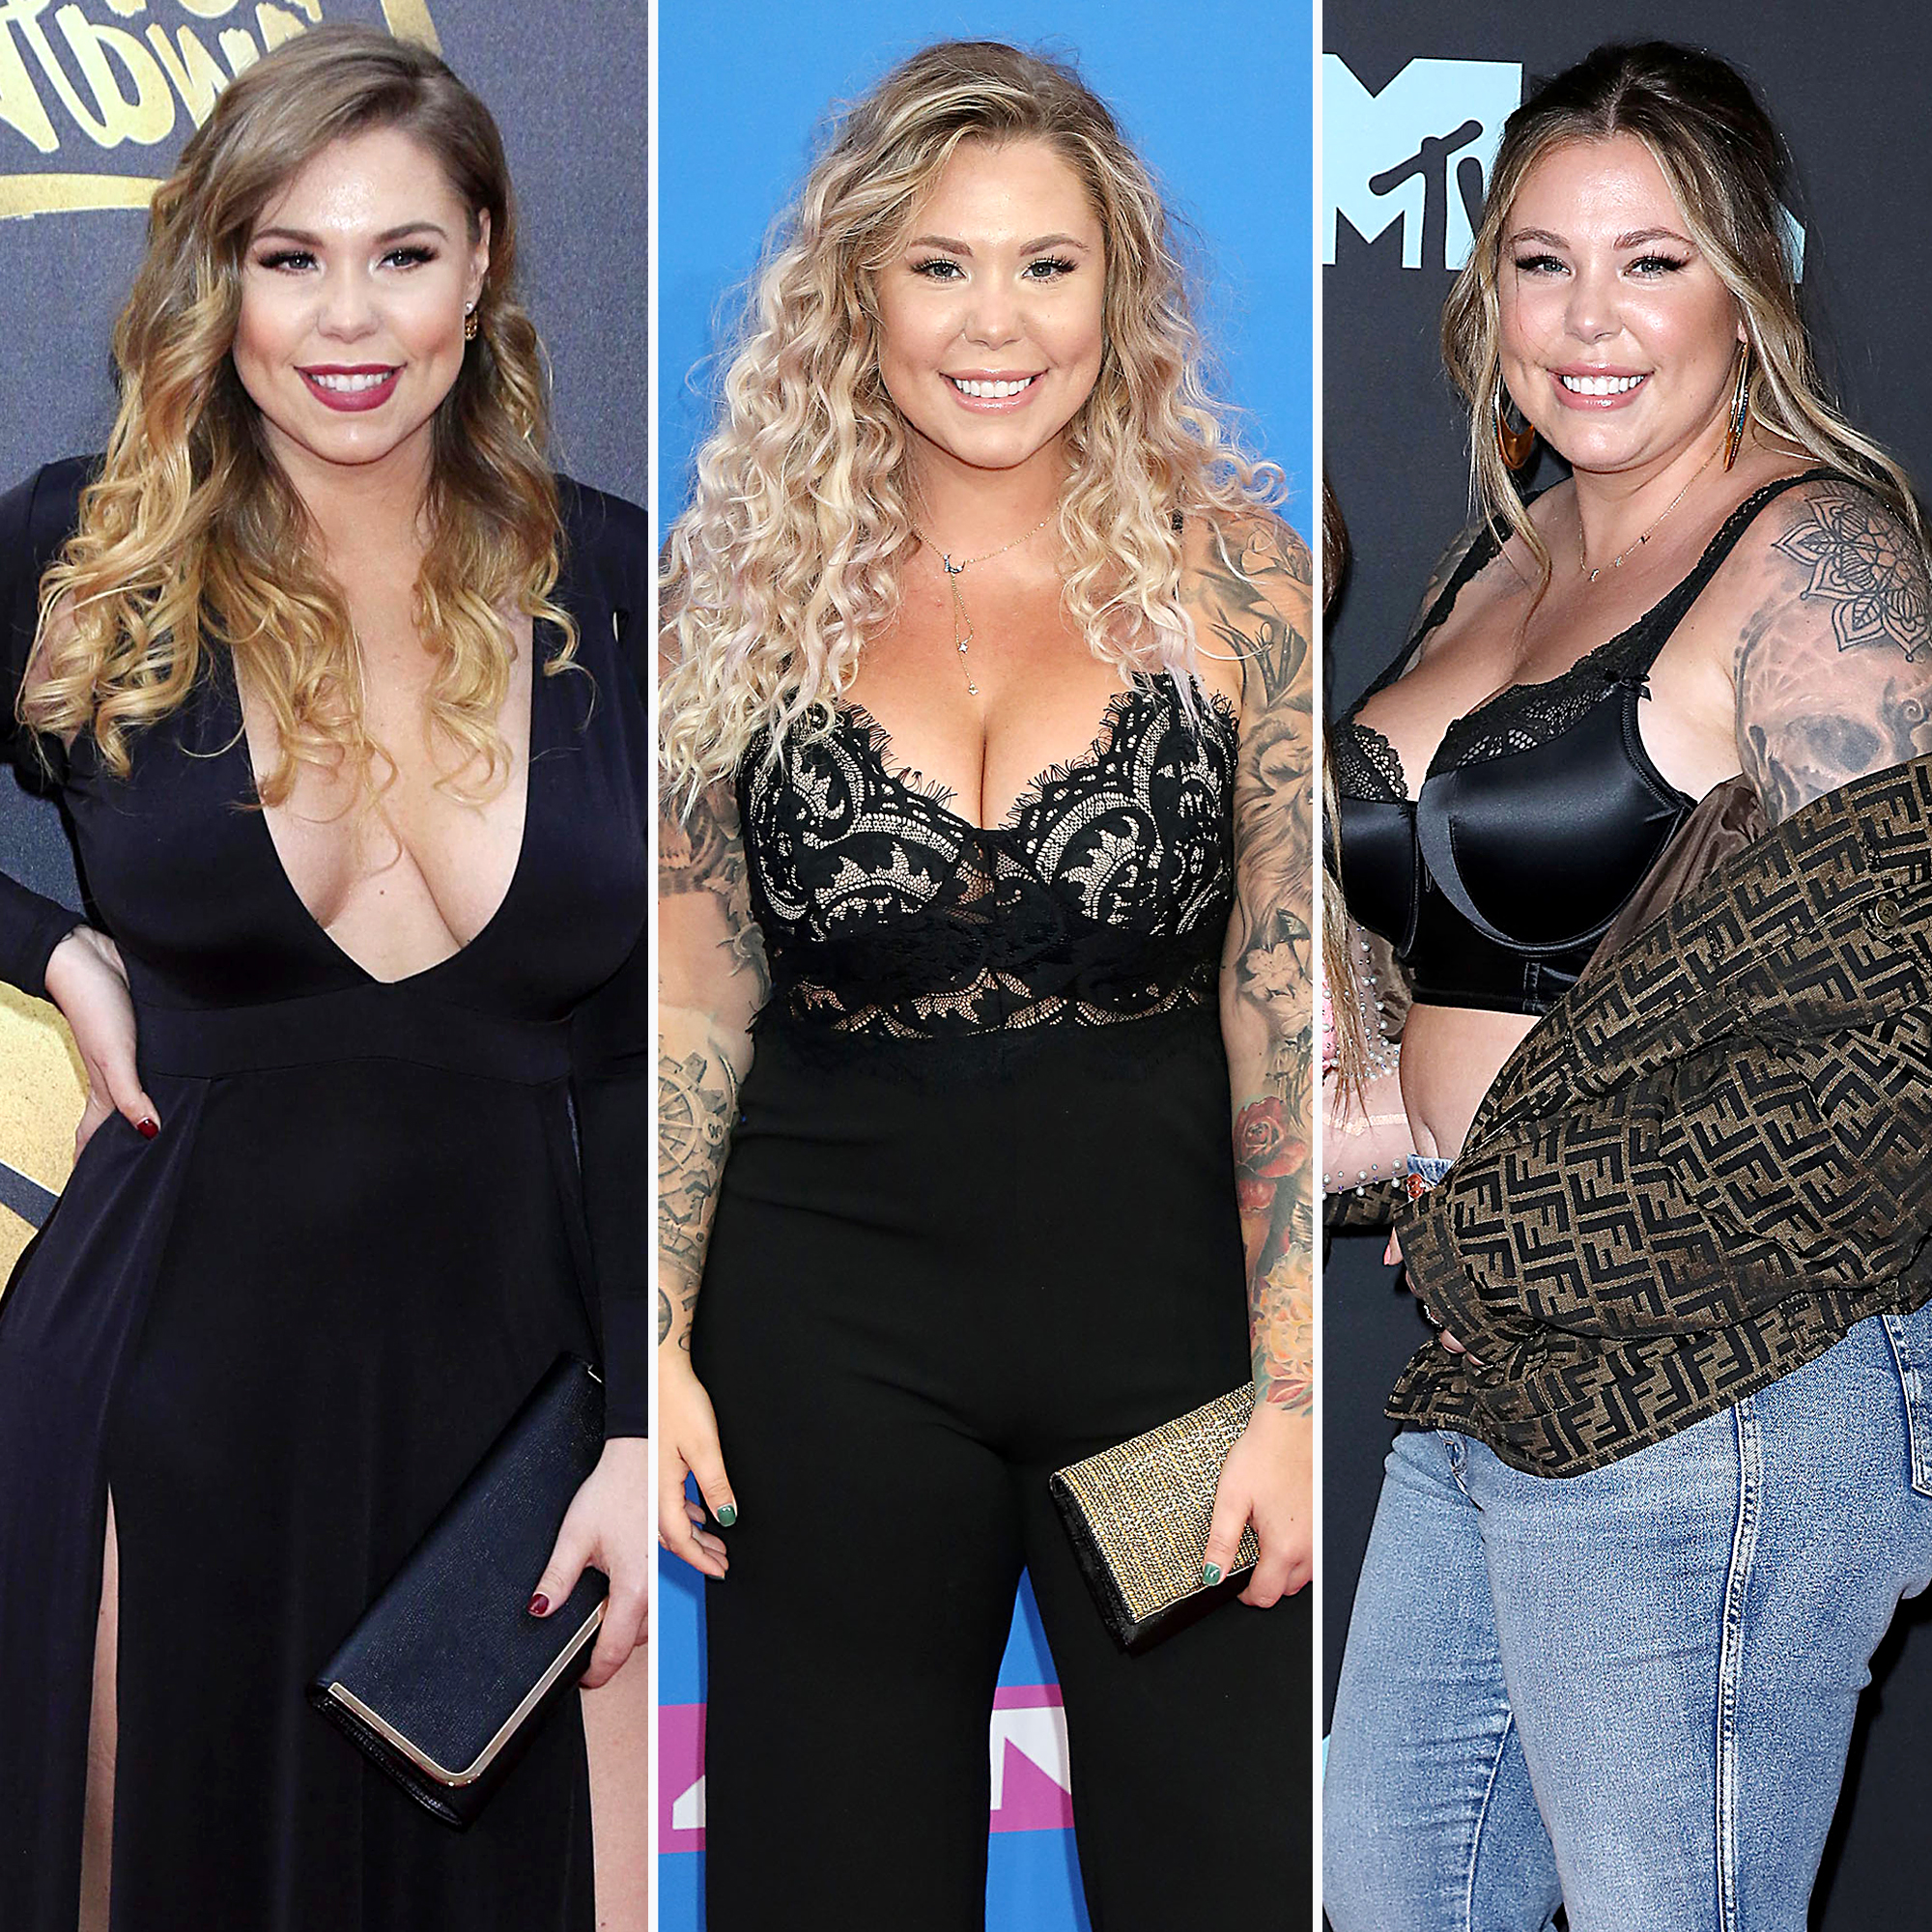 Kailyn Lowry's Plastic Surgery Transformation Photos